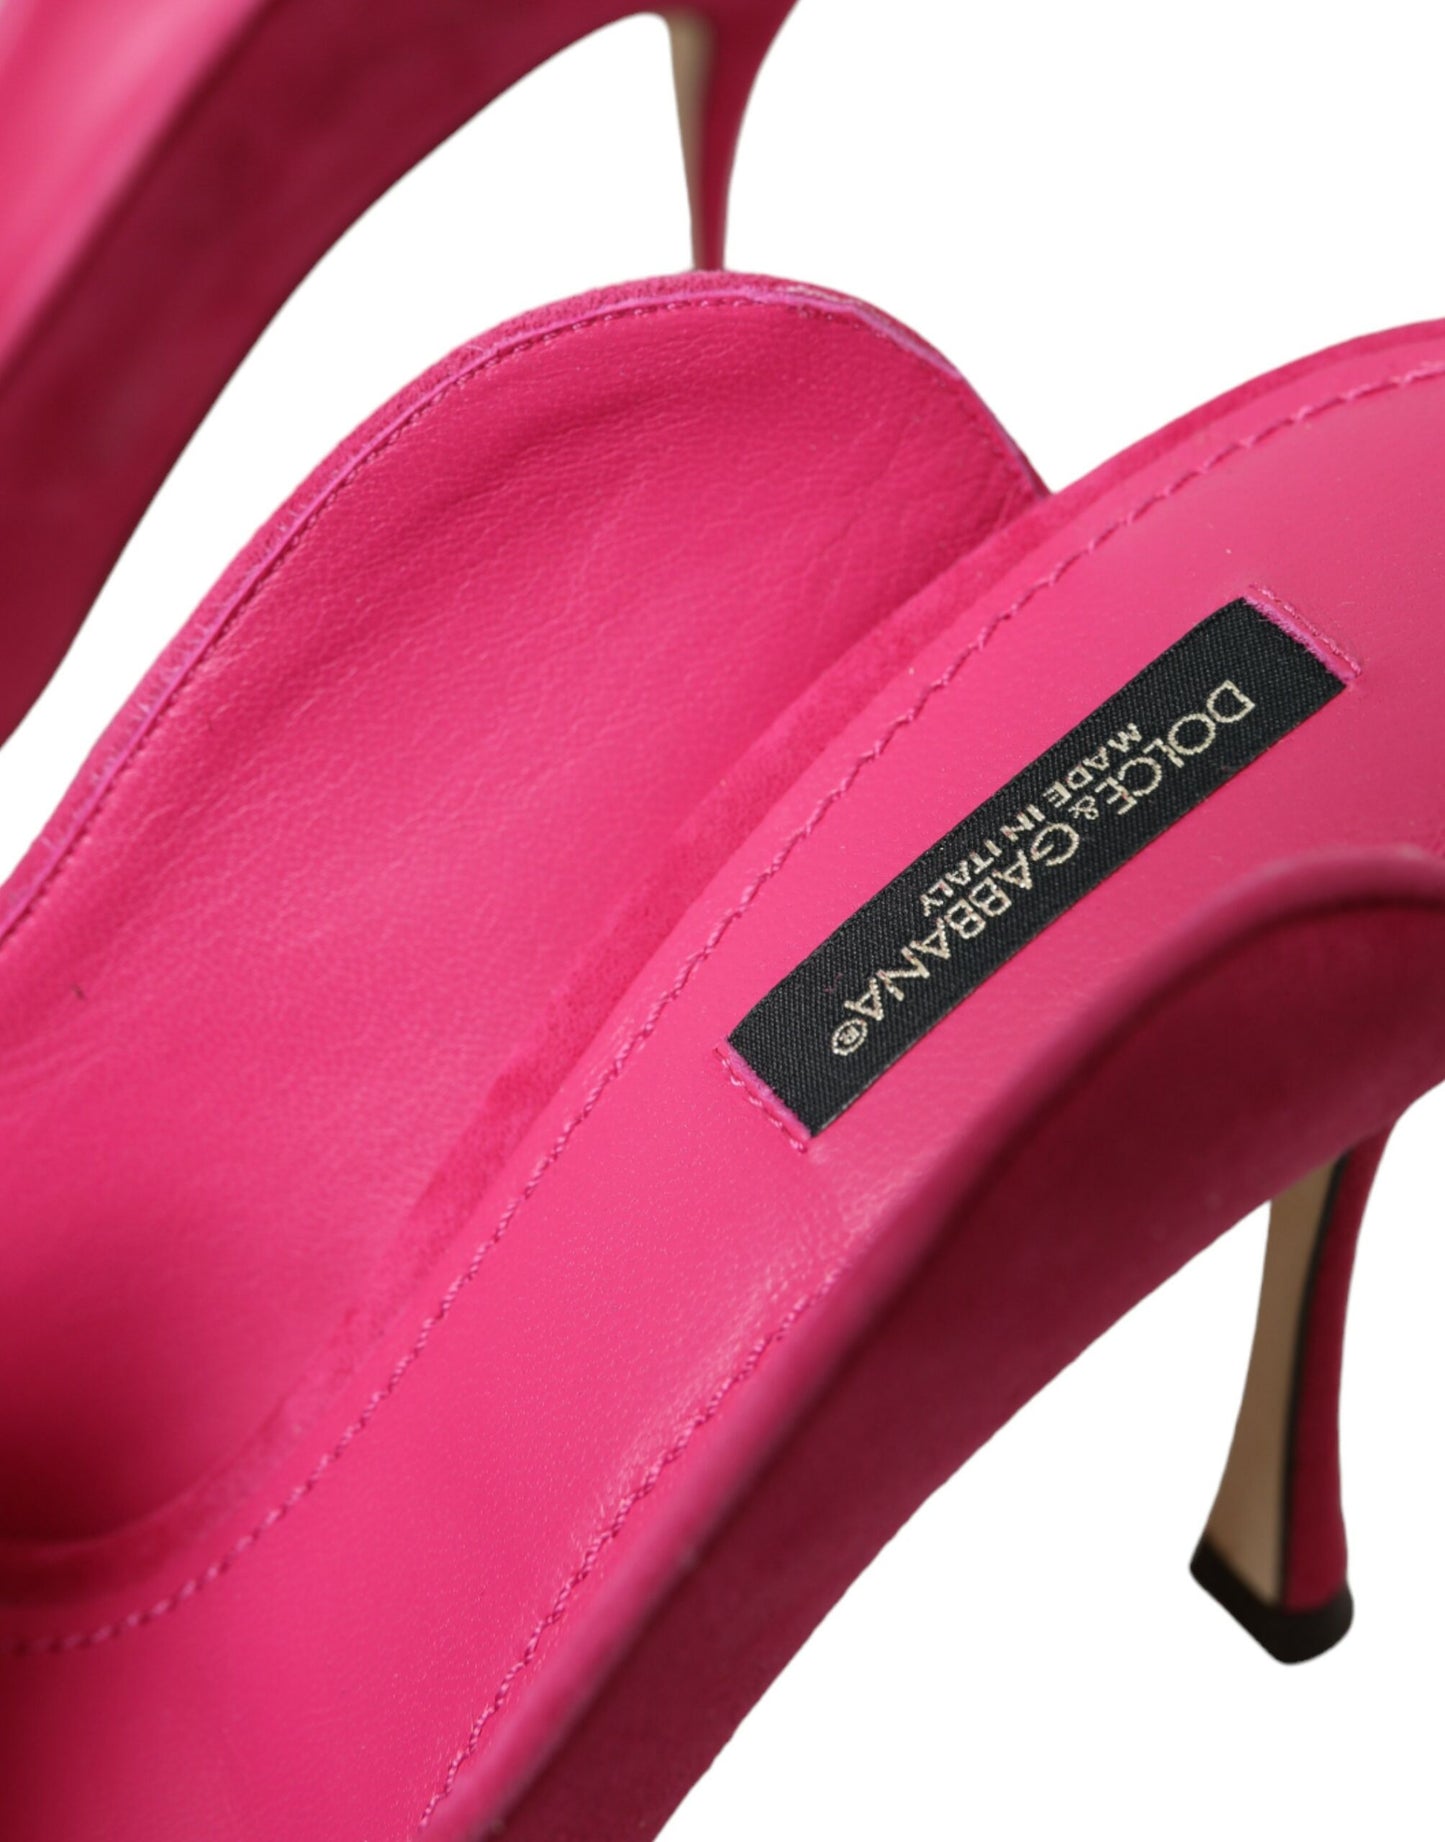 Fuchsia Suede Leather Mules Sandals Shoes